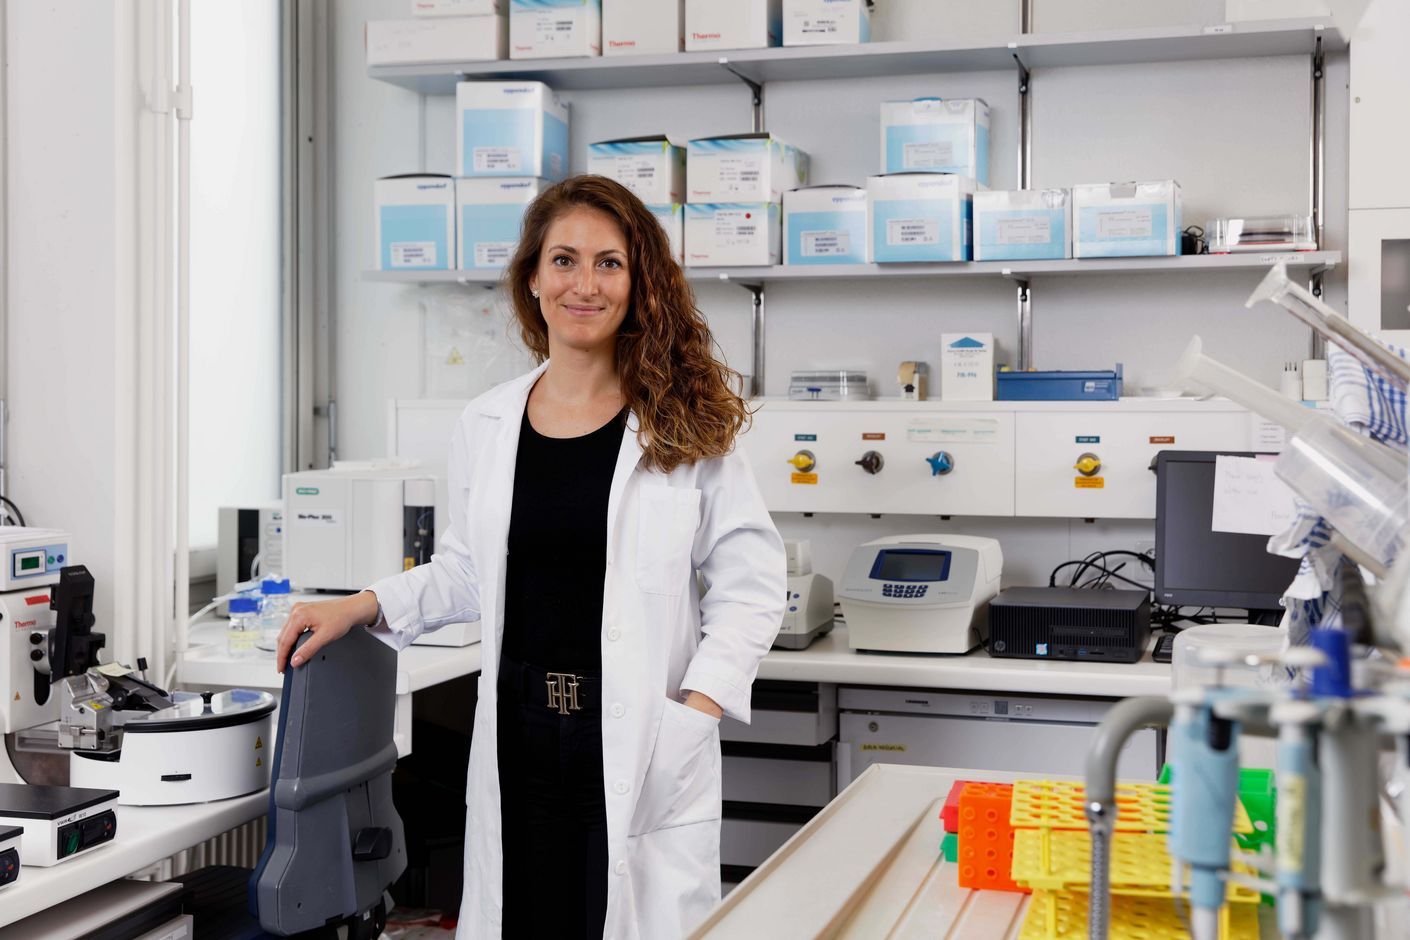 Molecular biologist Dr Ana Montalban-Arques in her lab at the University Hospital Zurich.